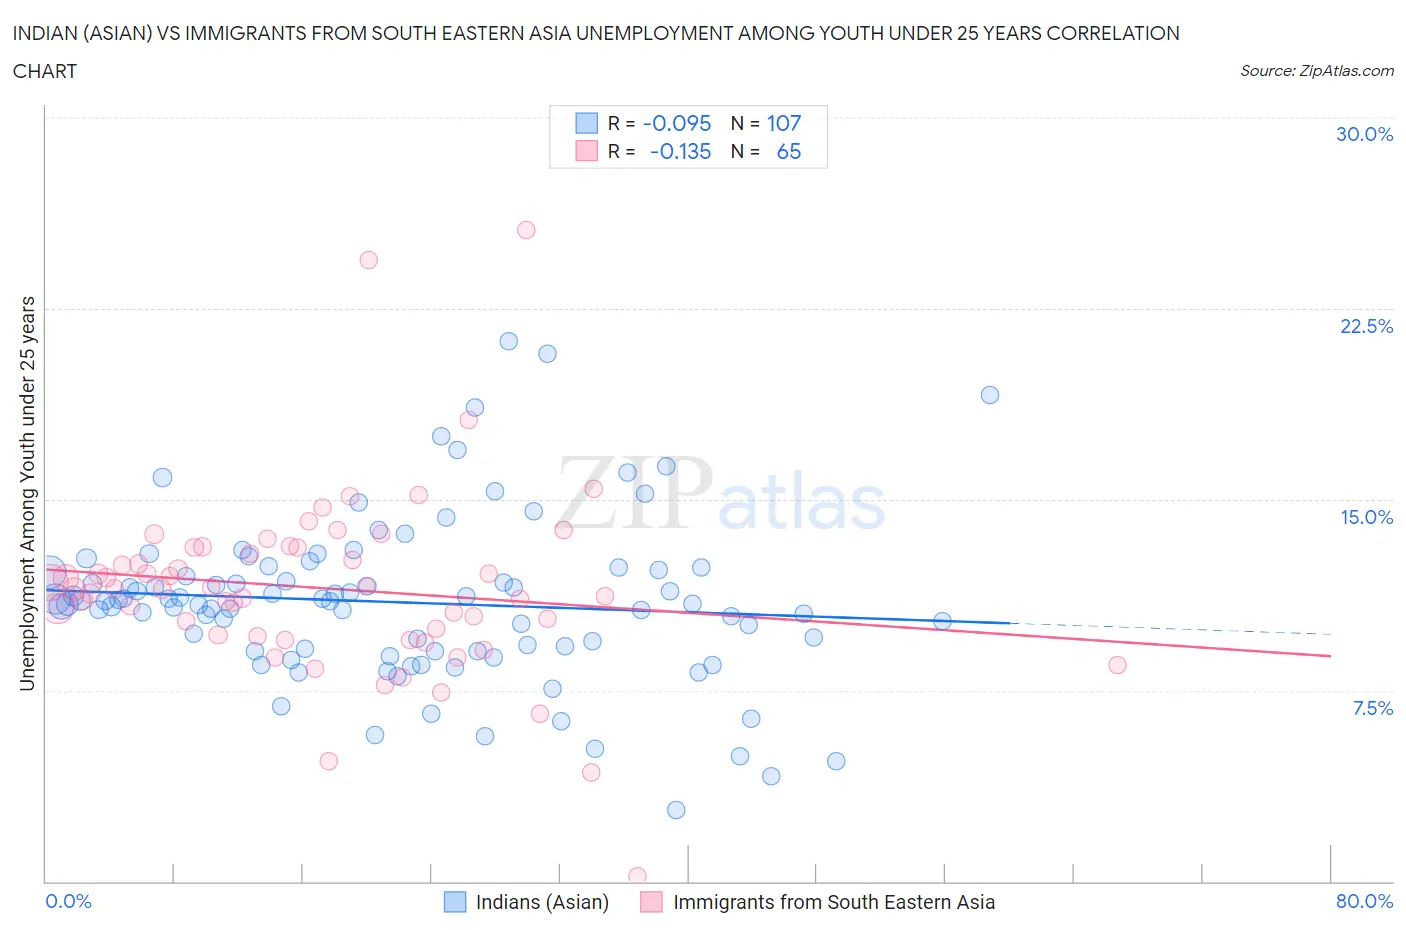 Indian (Asian) vs Immigrants from South Eastern Asia Unemployment Among Youth under 25 years